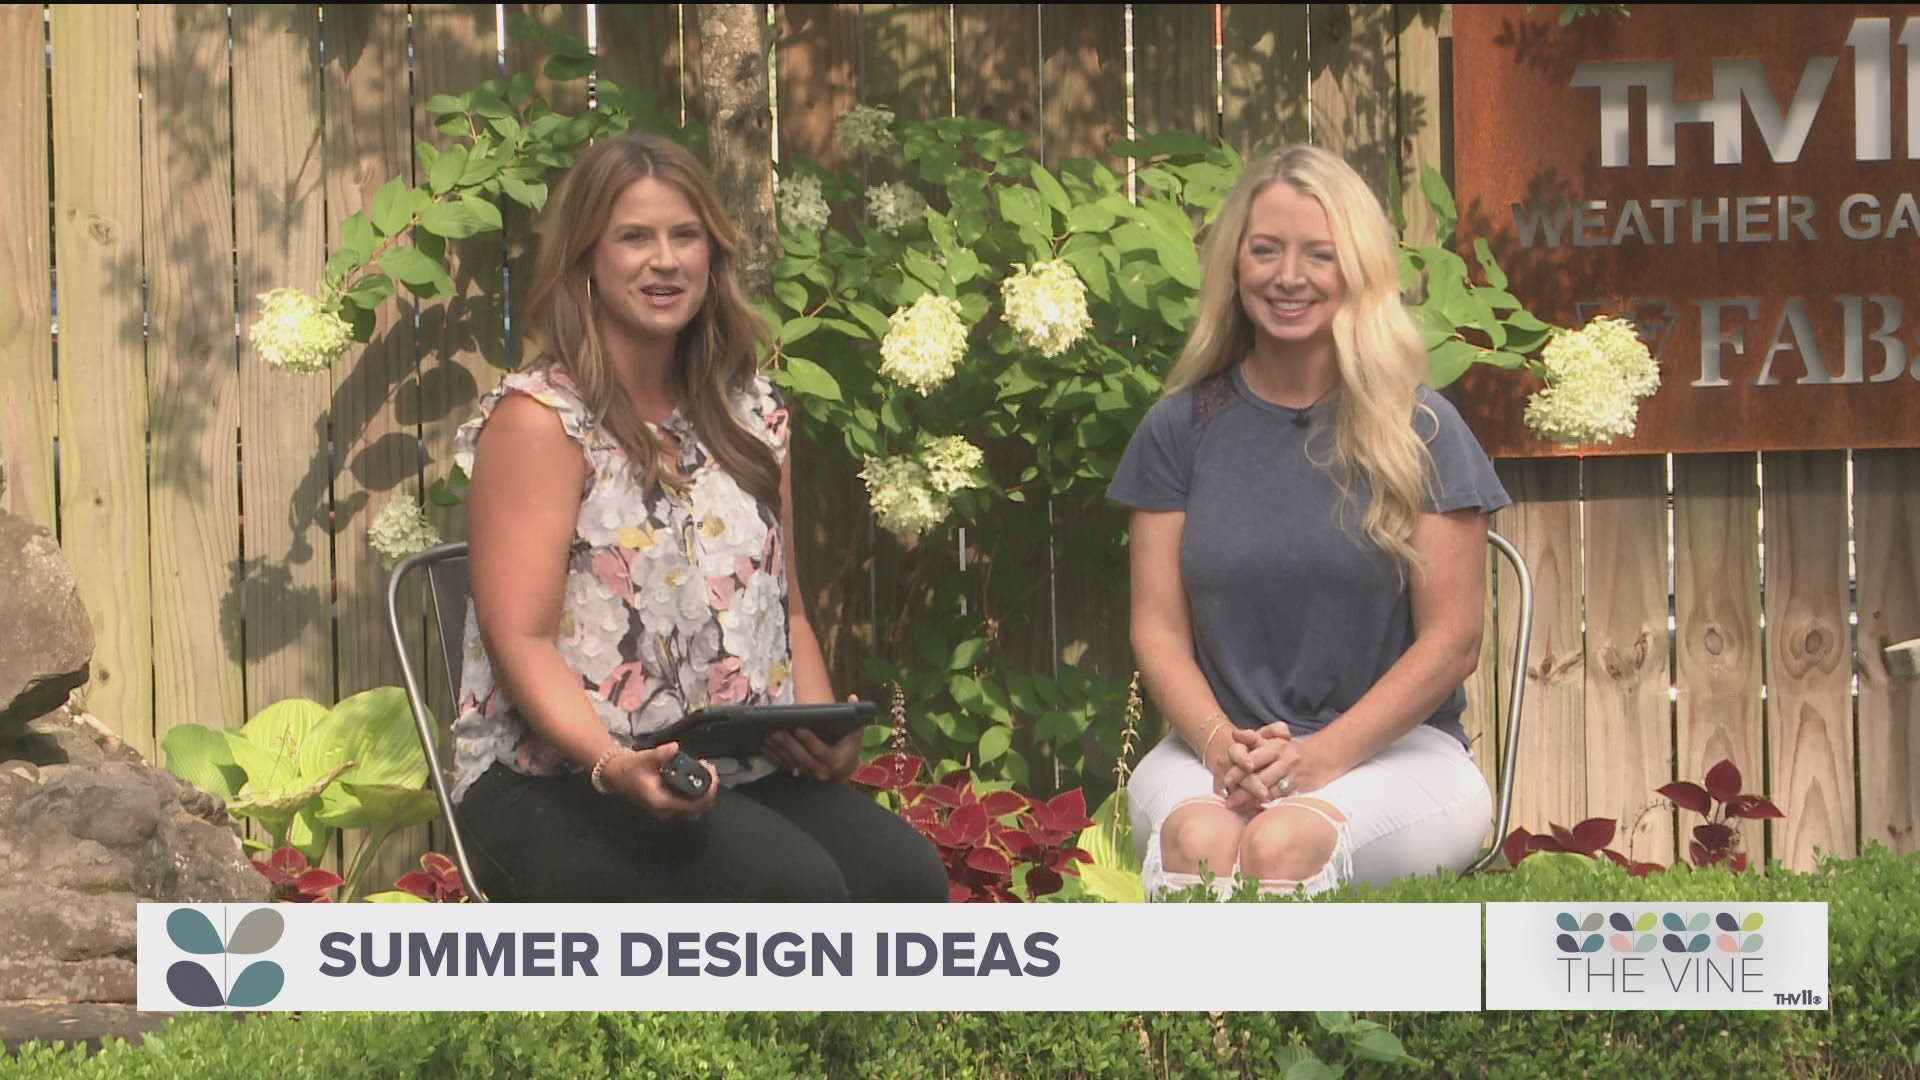 Lifestyle blogger Jennifer Maune shares design ideas for summer parties and backyard get-togethers.